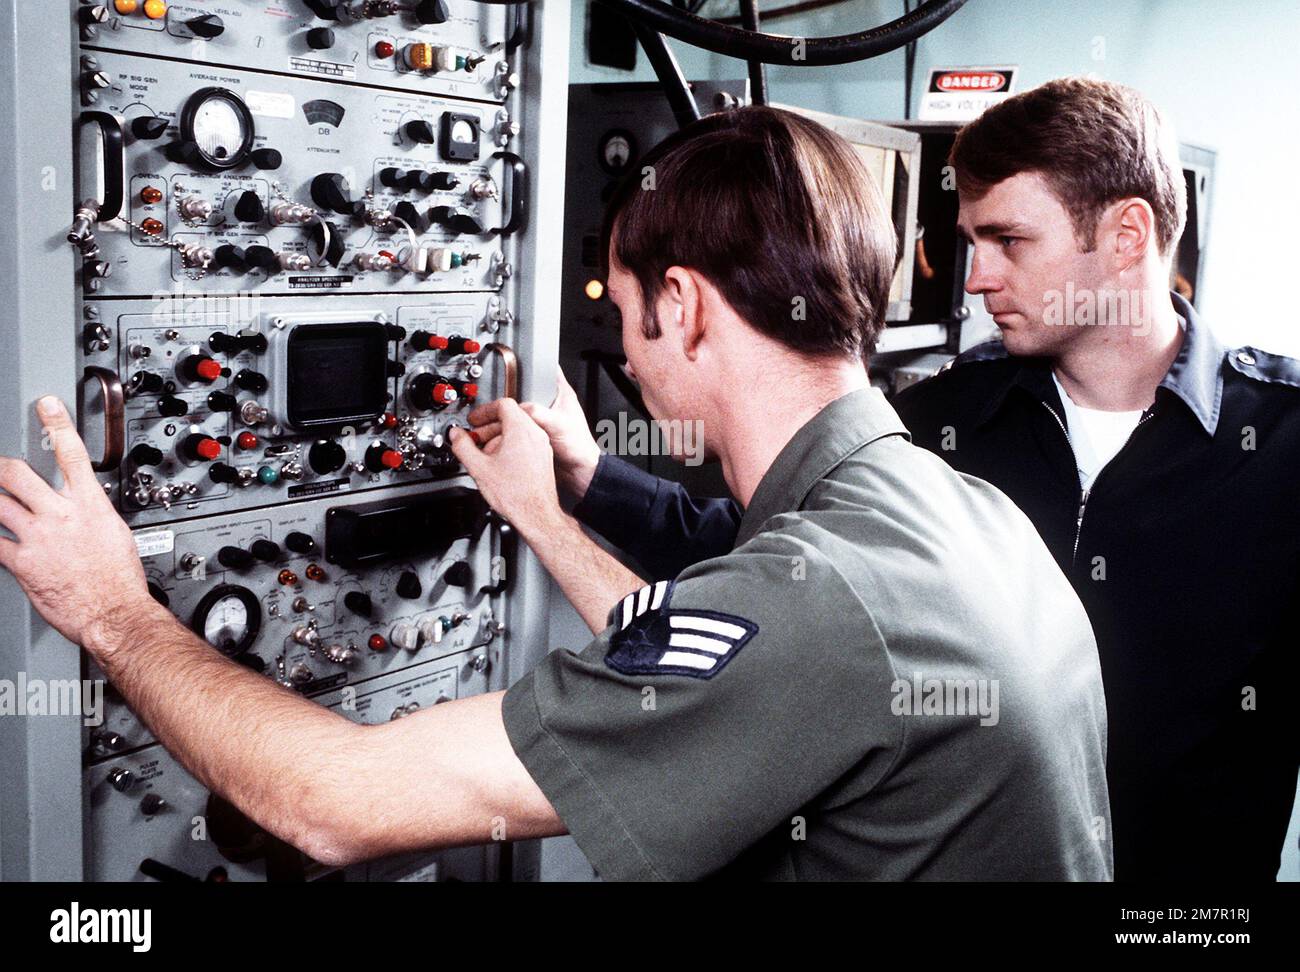 CPT Dale Meyerrose, chief of maintenance, watches as SRA Glenn King, navigational aids maintenance specialist, adjusts the tactical air navigation (TACAN) equipment at the 1974th Communications Group, Air Force Communications Command (AFCC). Base: Scott Air Force Base State: Illinois (IL) Country: United States Of America (USA) Stock Photo